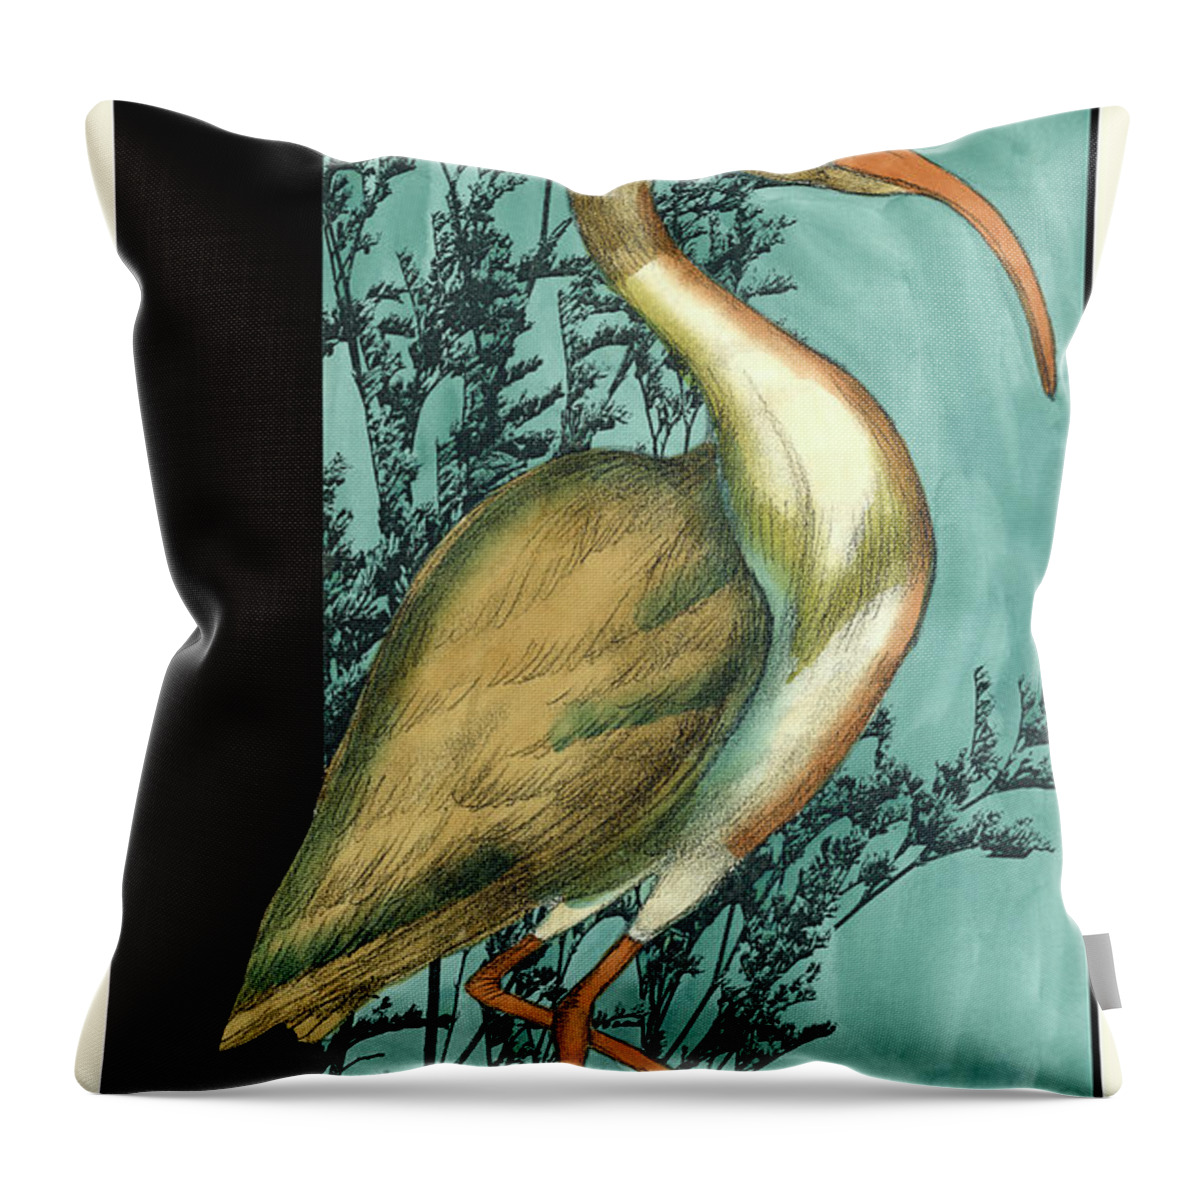 Animals Throw Pillow featuring the painting Heron In The Grass I by Jennifer Goldberger